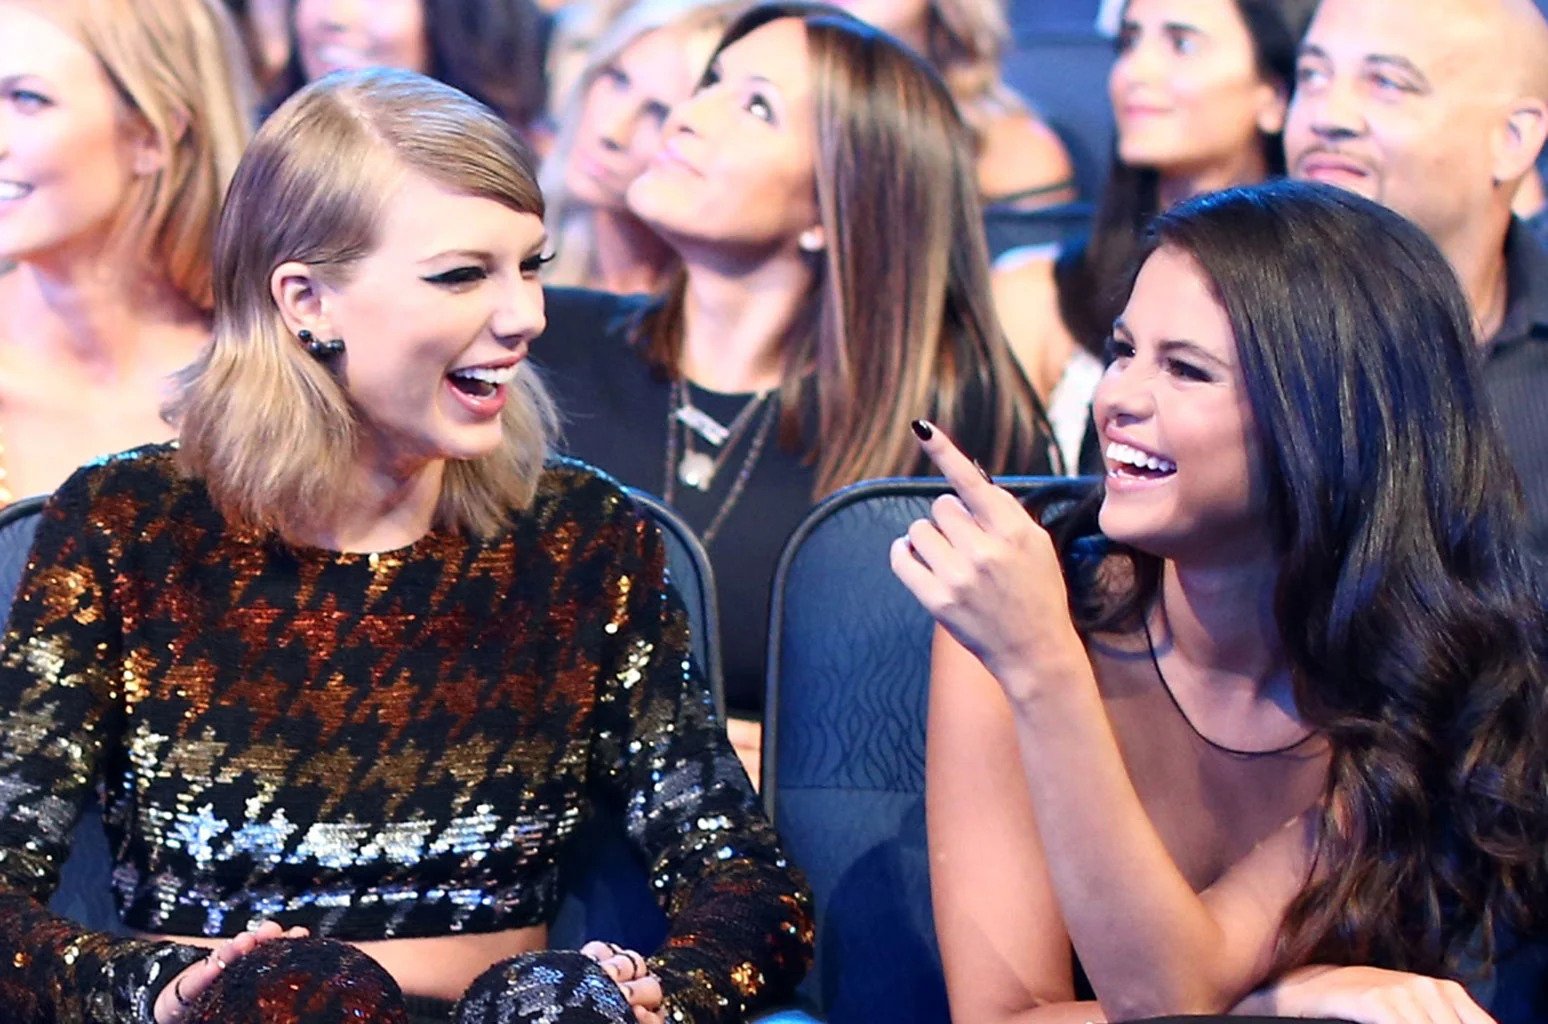 Facts About Selena Gomez - After All, Selena Still Has A Close Bond With Tay Tay